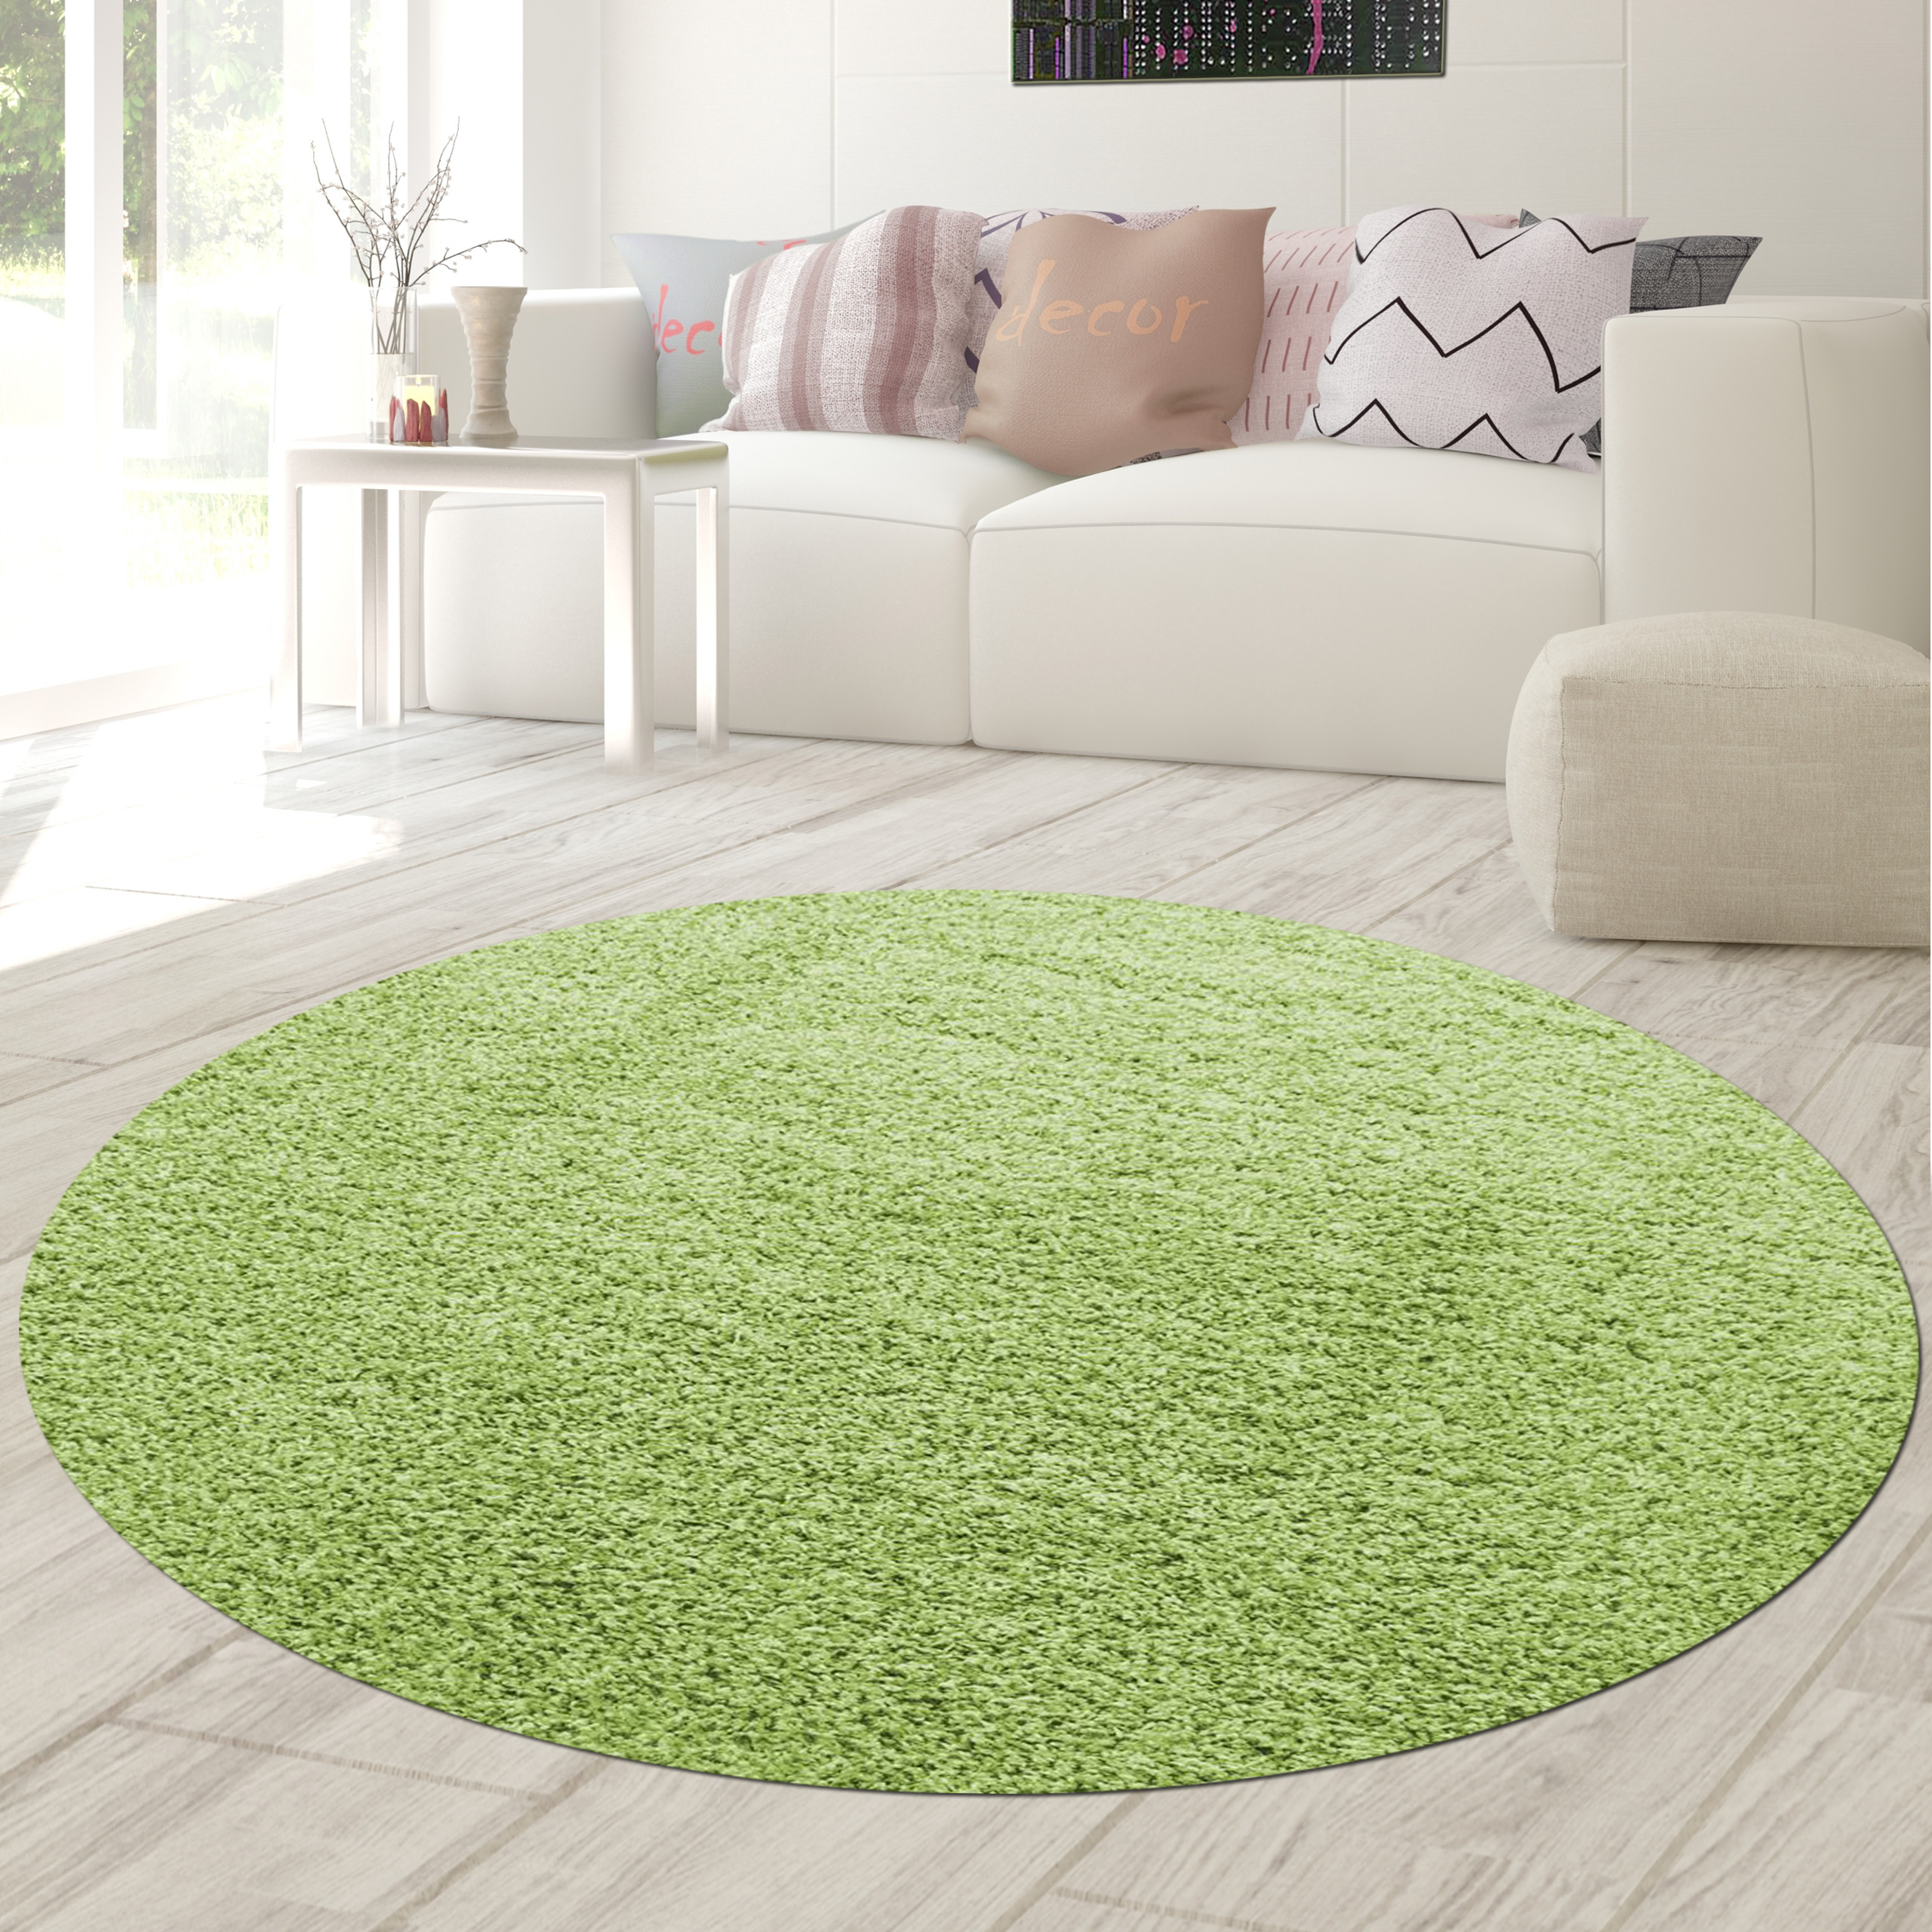 Shag carpet emission free (approx) - weight (approx) / 30mm Total 2.2 overall 100% gr polypropylenes height m² Teppich-Traum frisee, Merilon